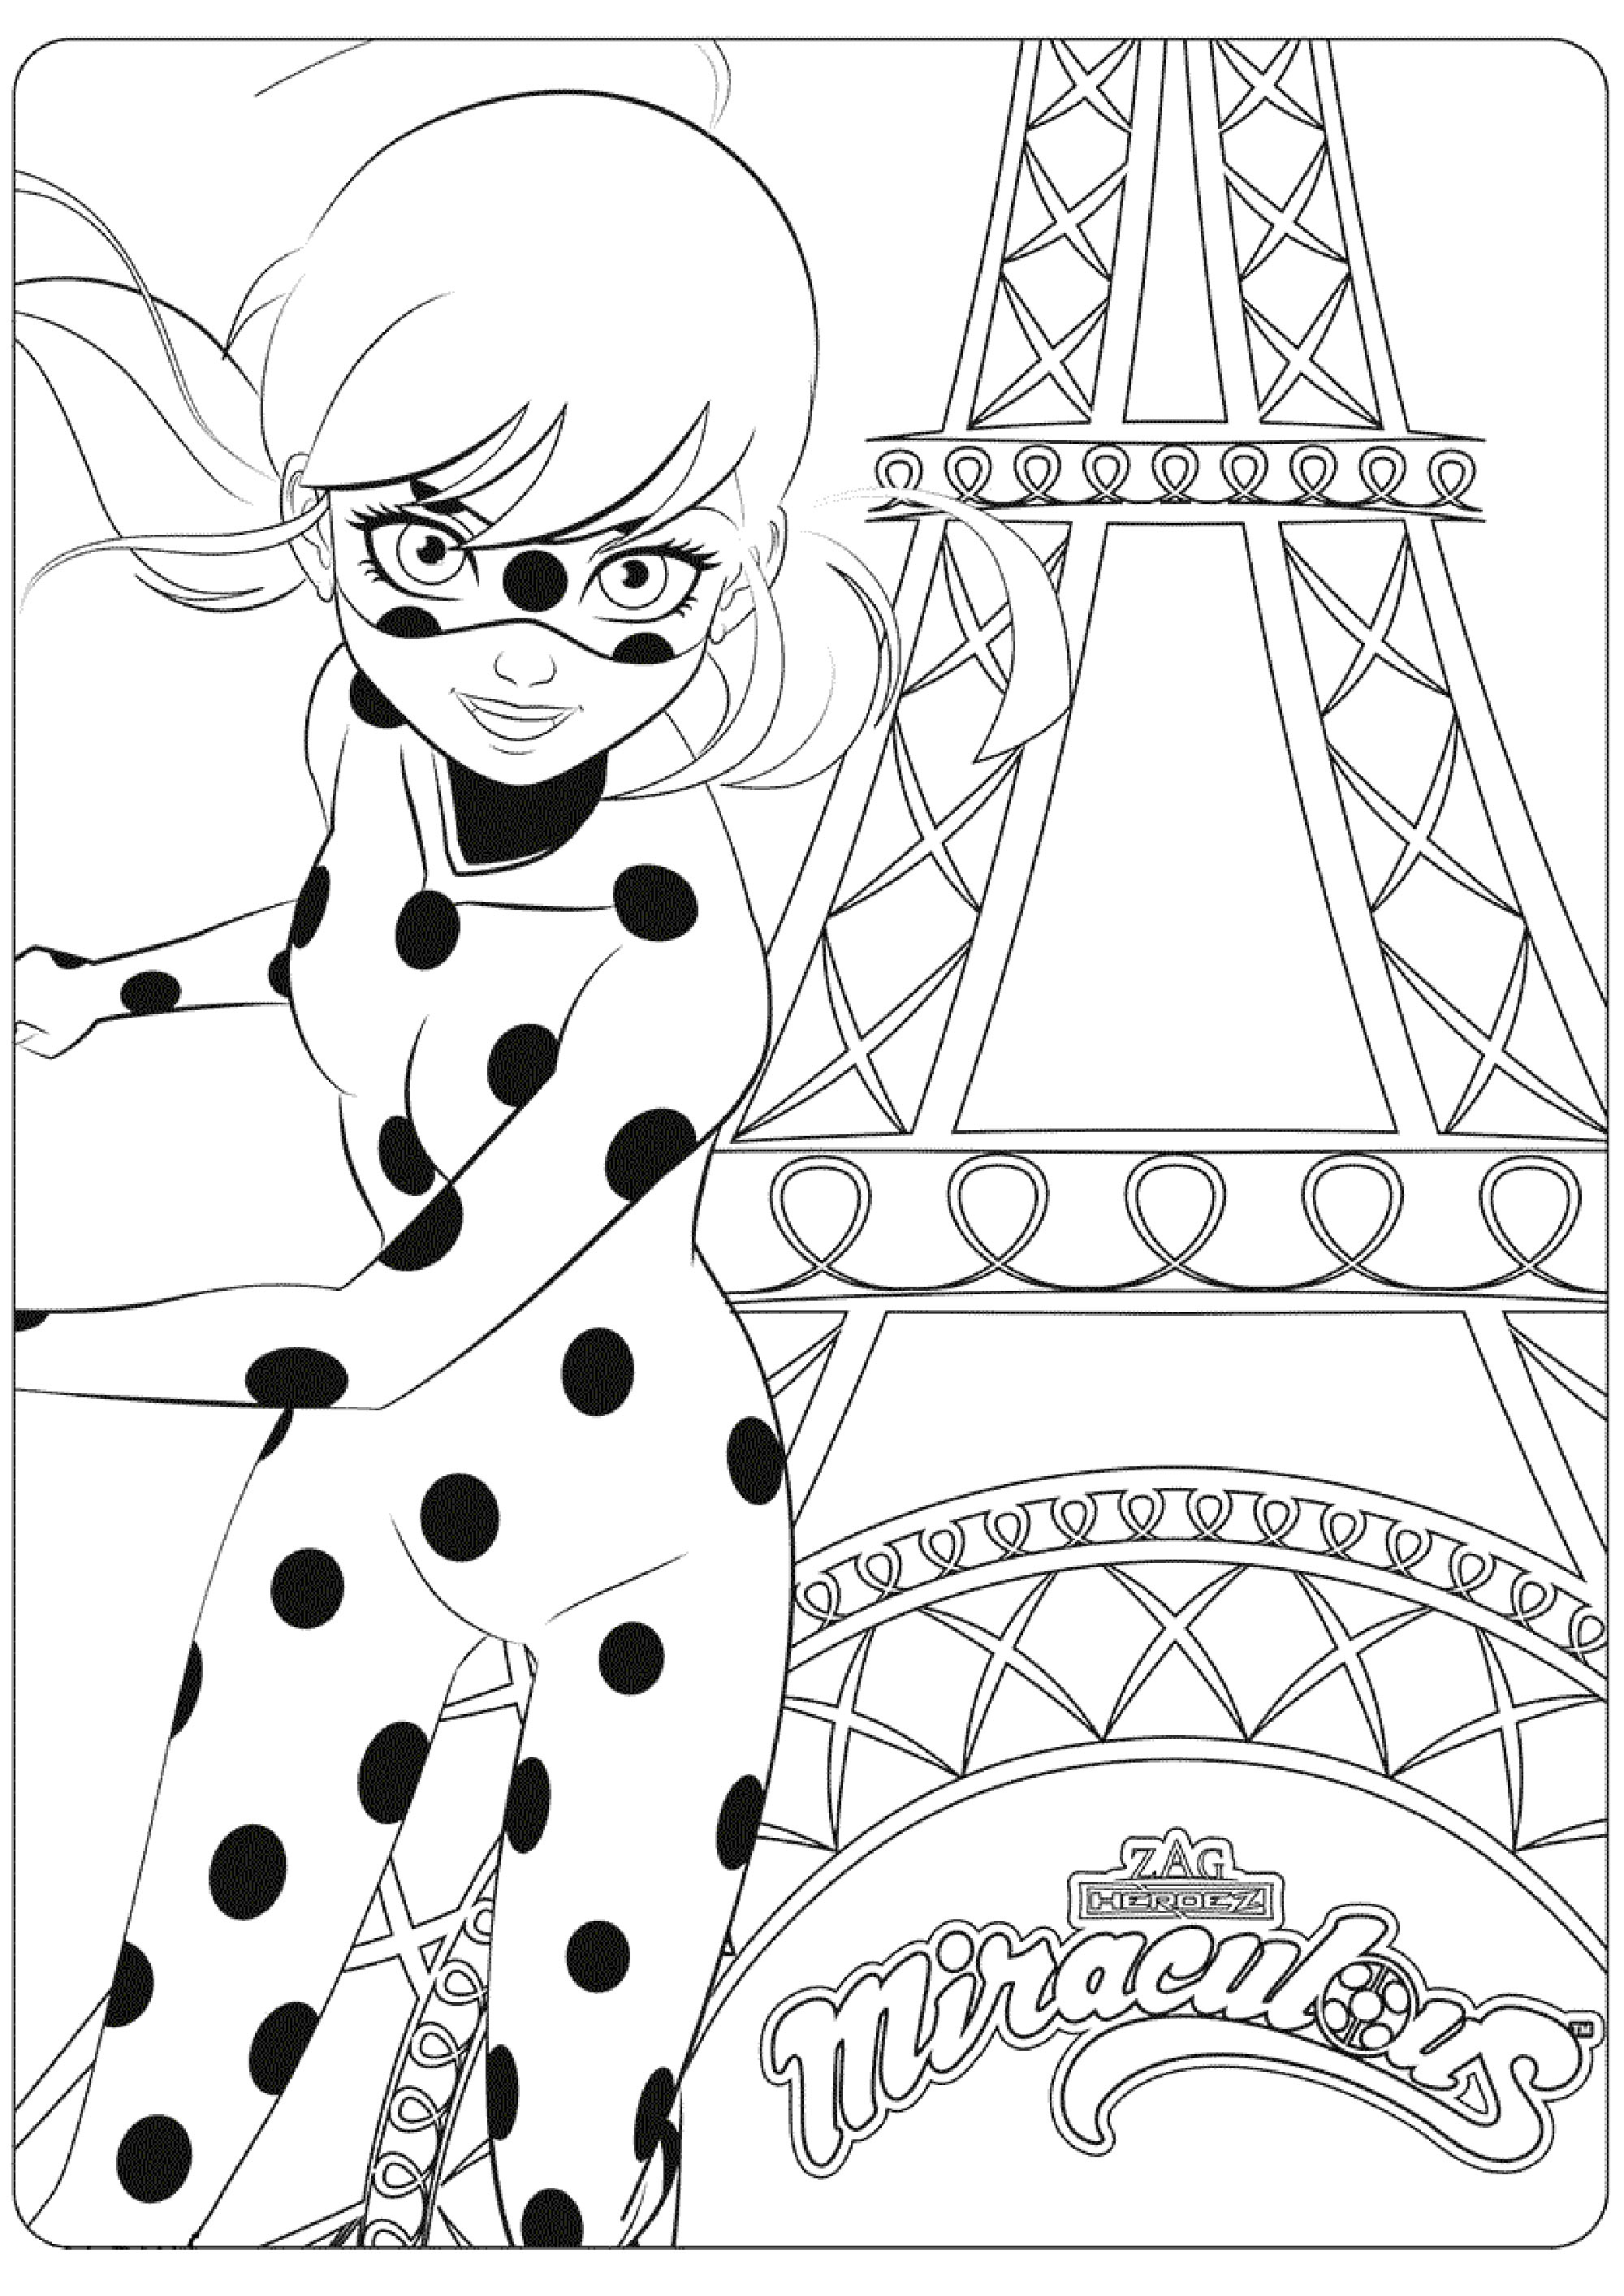 Download Miraculous lady bug free to color for children ...